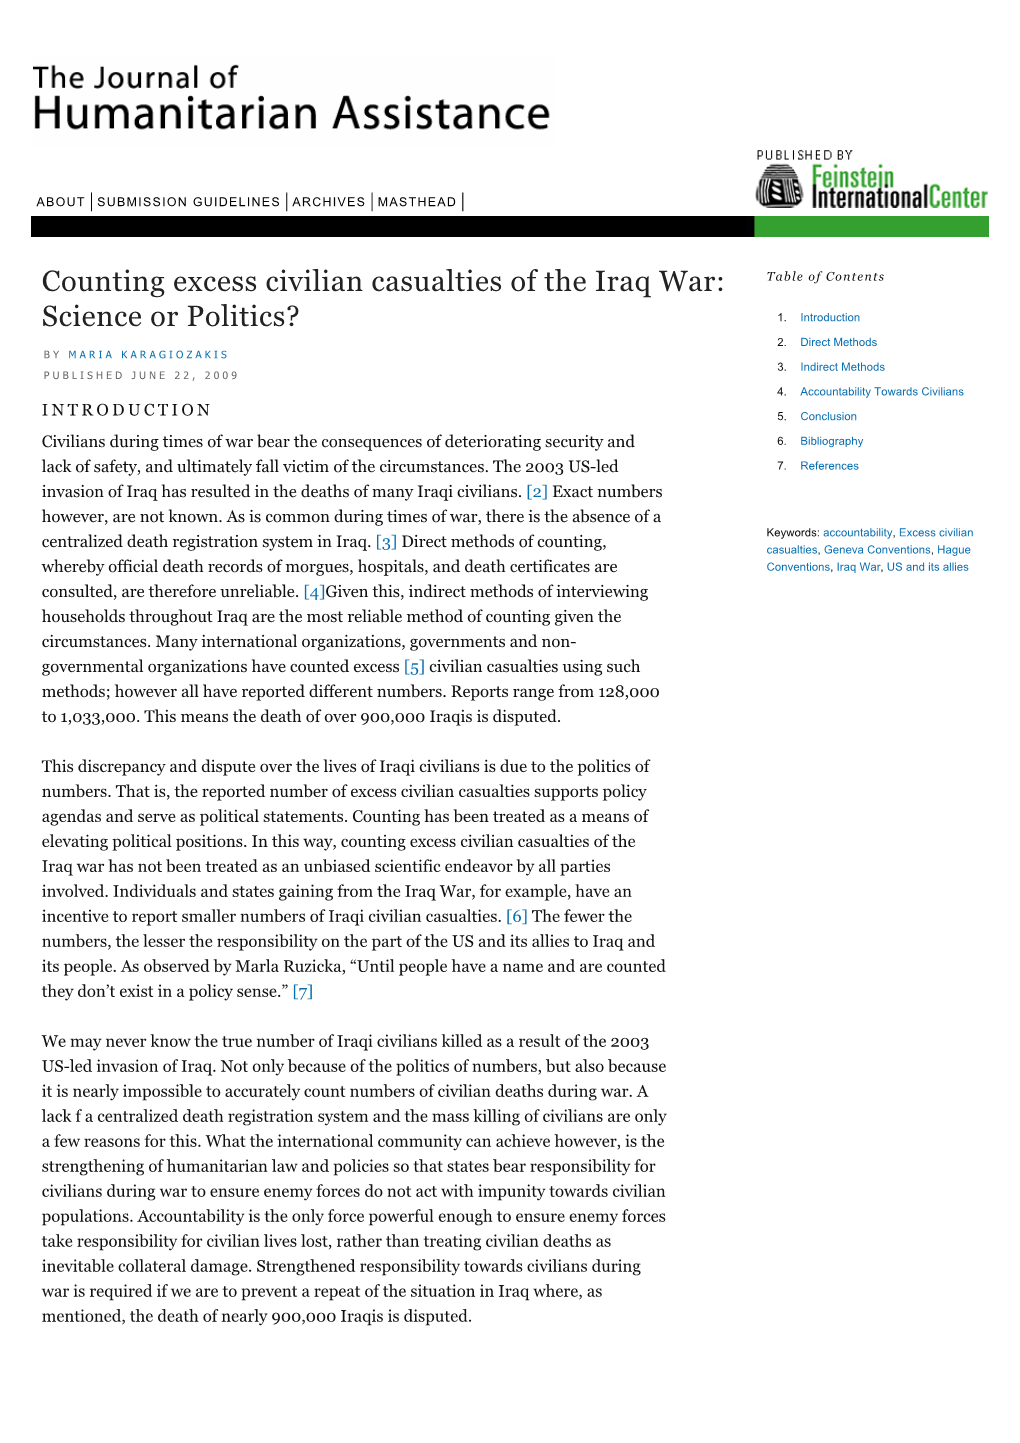 Counting Excess Civilian Casualties of the Iraq War: Table of Contents Science Or Politics? 1